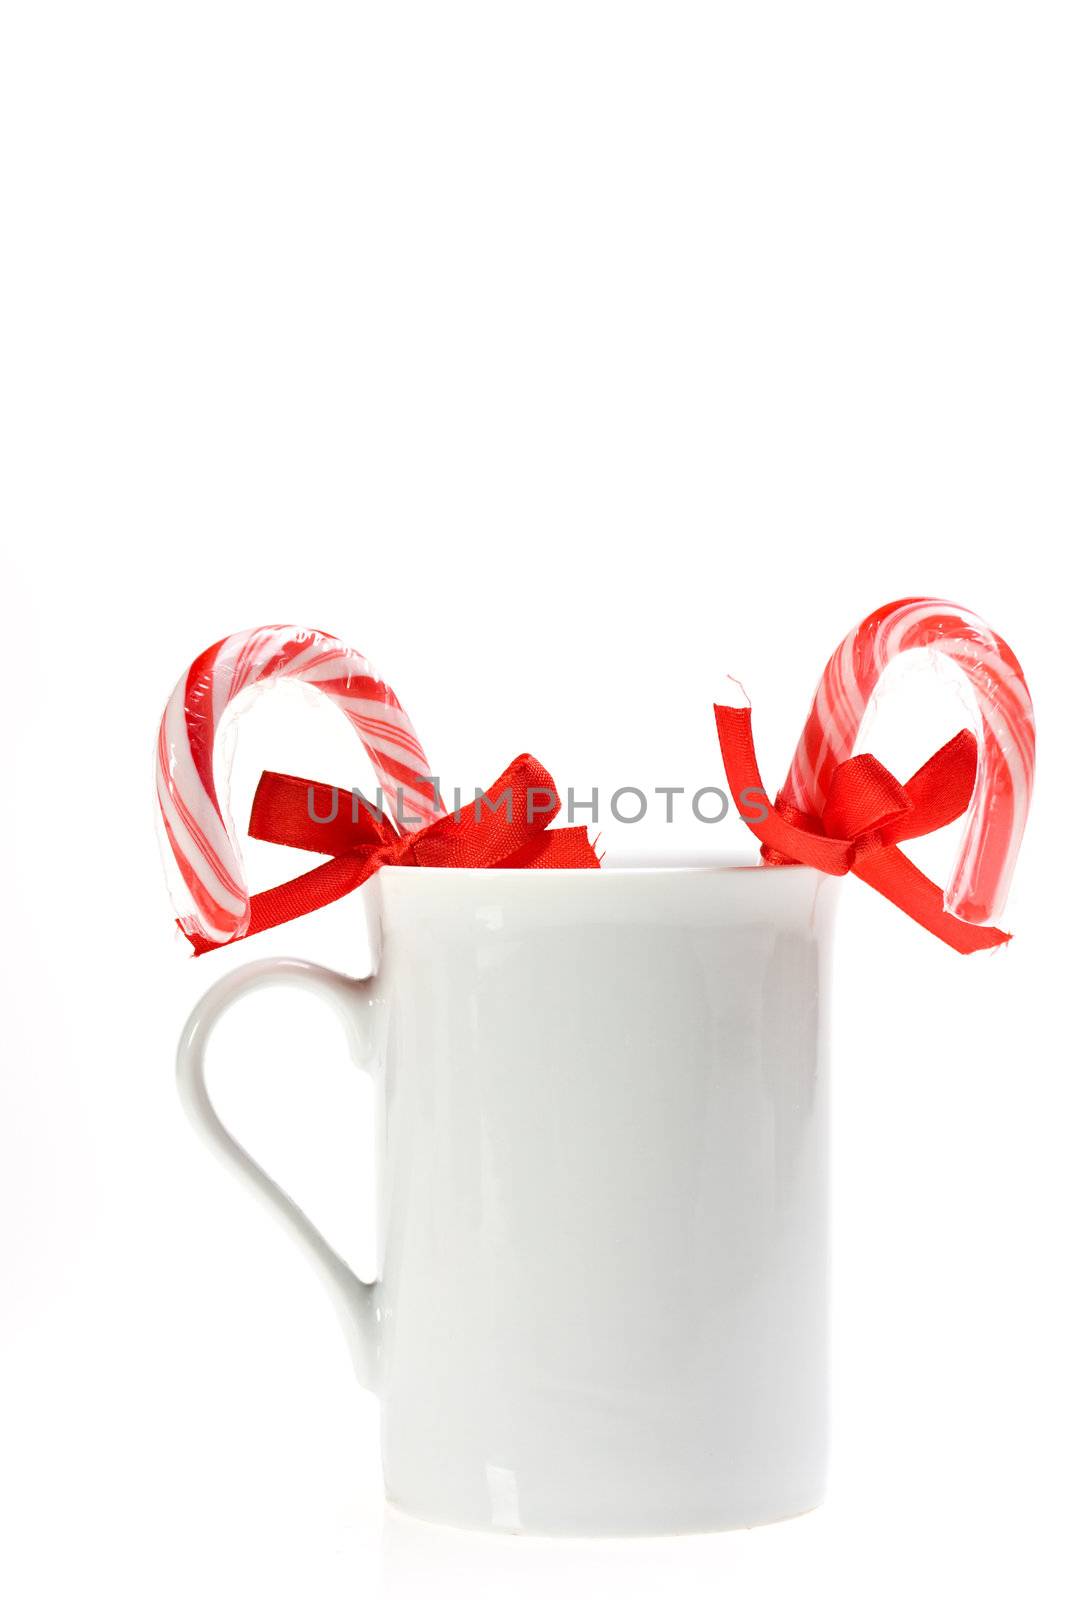 sugar canes in a white cup isolated